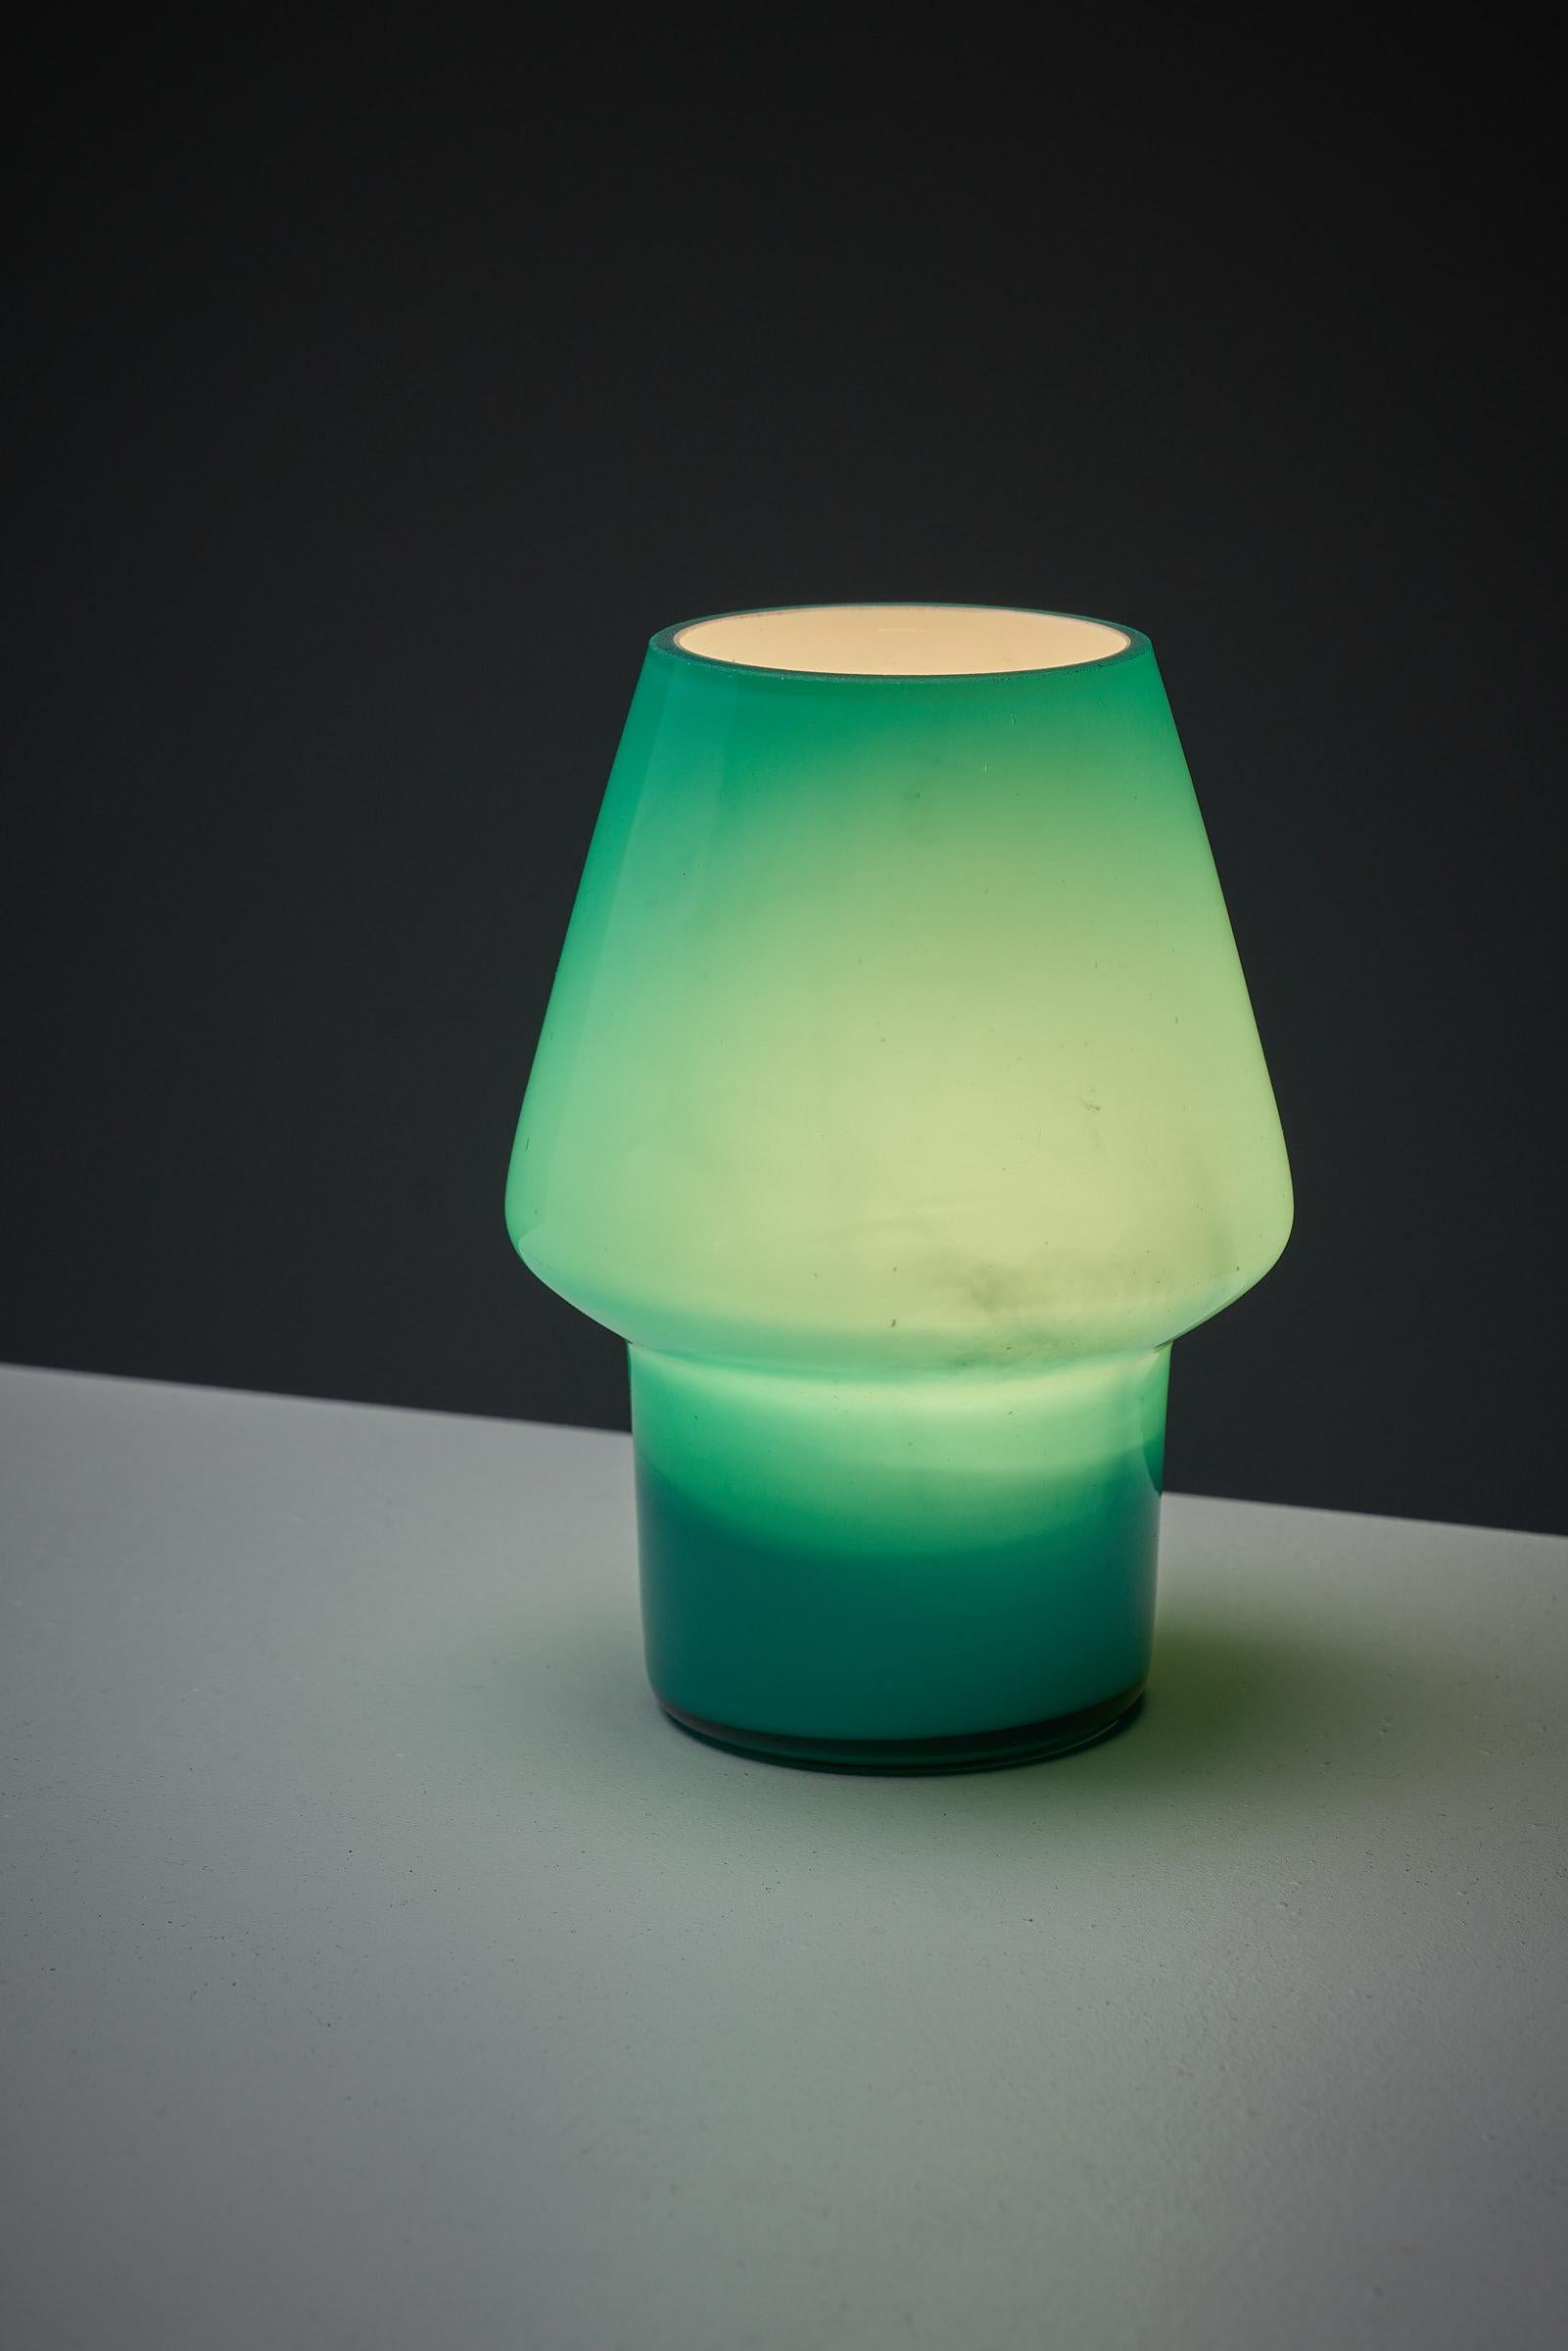 Beautiful glass table lamp. In perfect condition with the original brand sticker still on. The glass is made with a white inner layer to diffuse the light more evenly and has absolutely no chips.
With its beautiful sea green color, this is a very